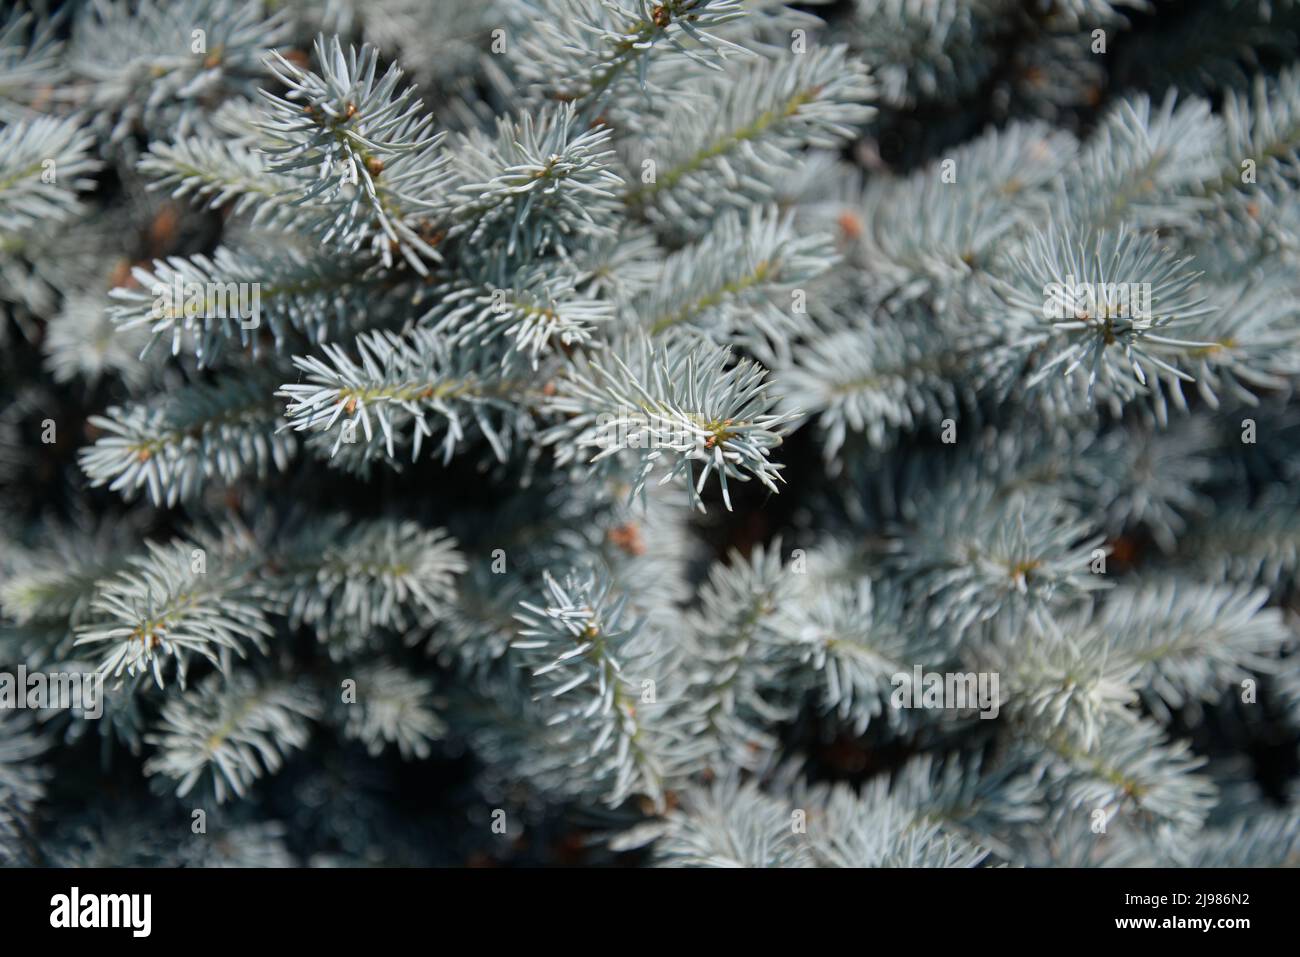 The blue spruce (Picea pungens), also commonly known as green spruce, white spruce. It is native to North America and is found naturally in Arizona, C Stock Photo